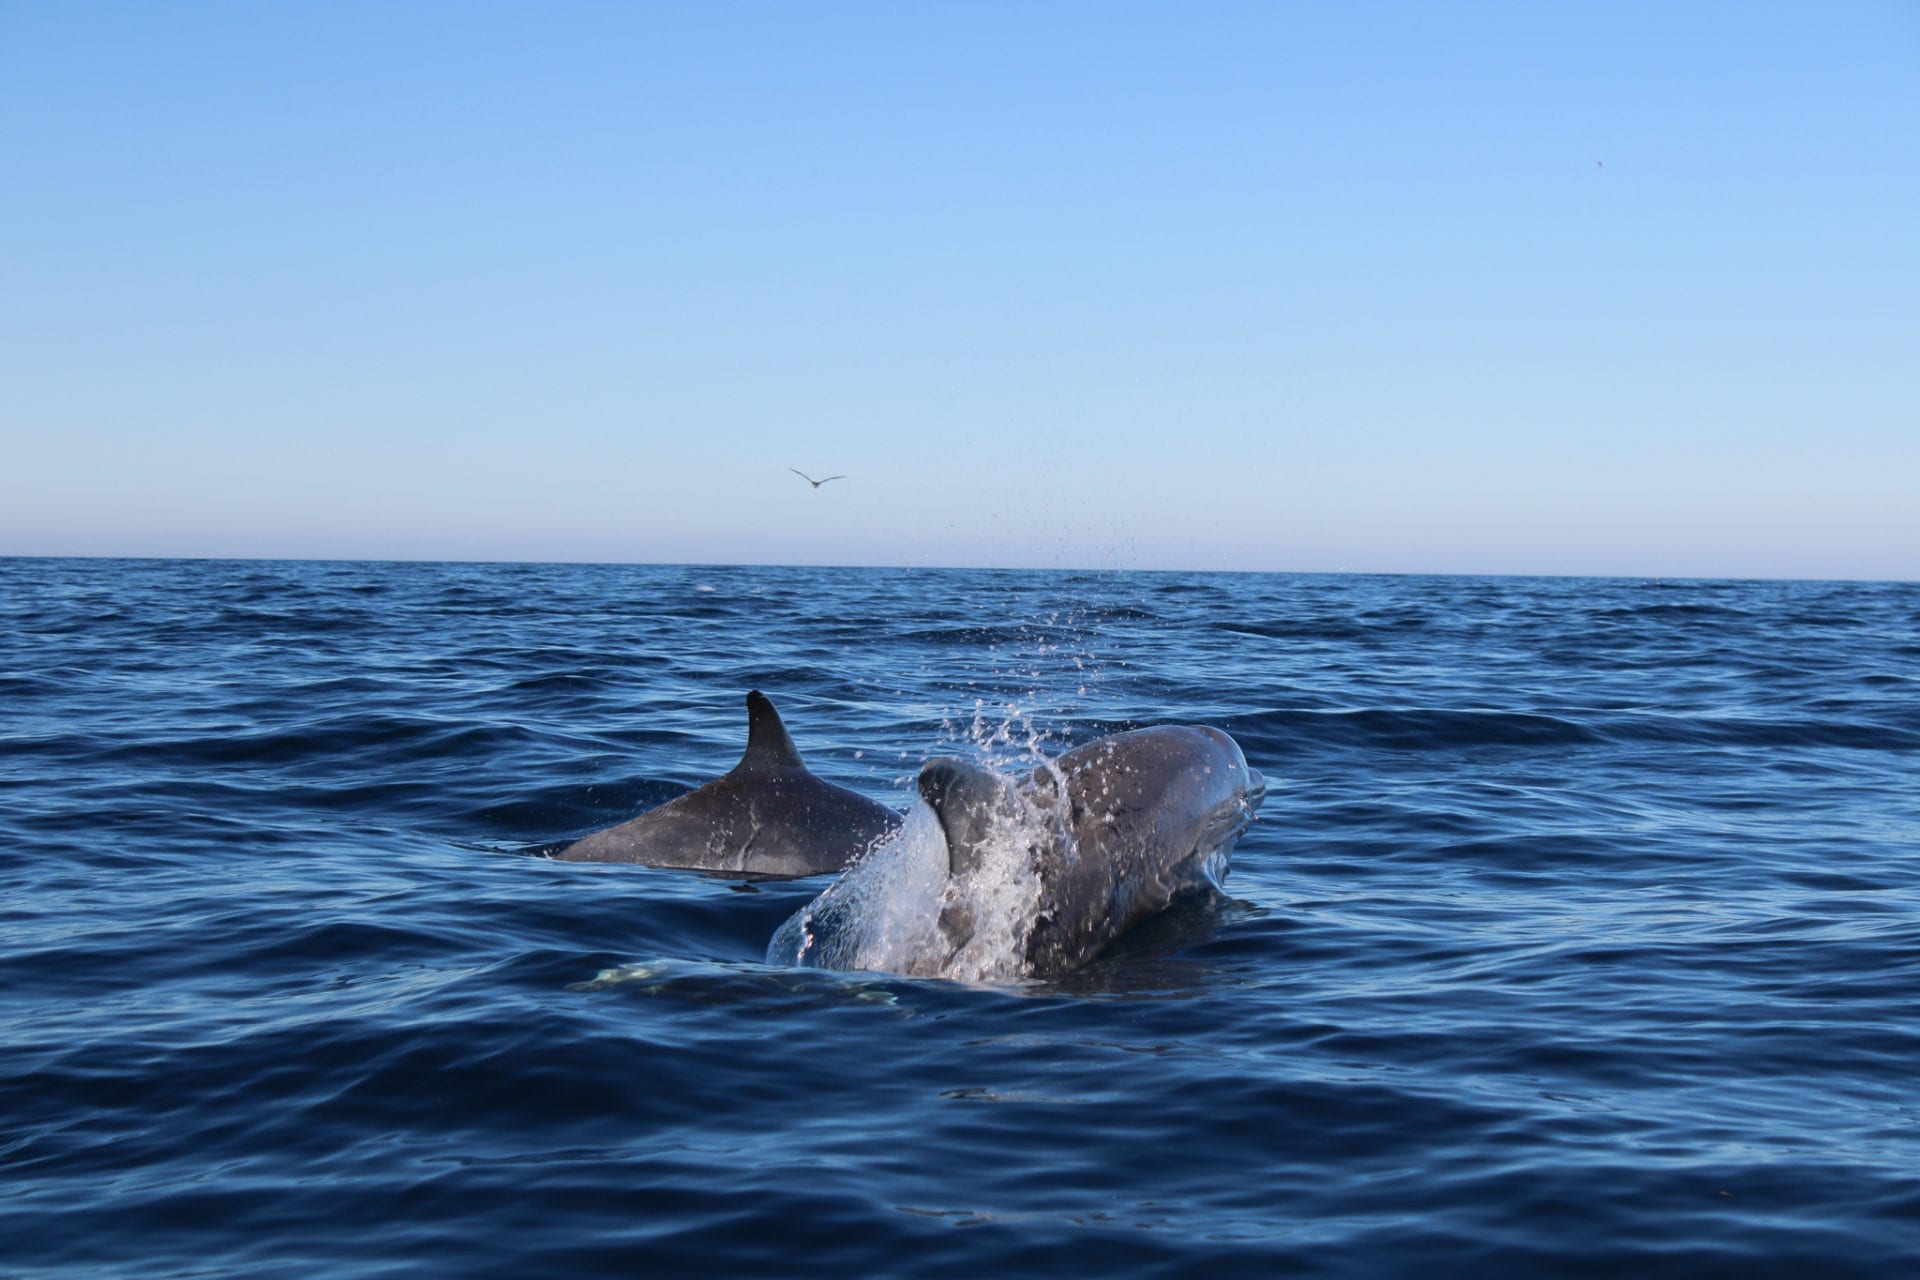 Dolphins in Algarve. Where to go to see dolphins.